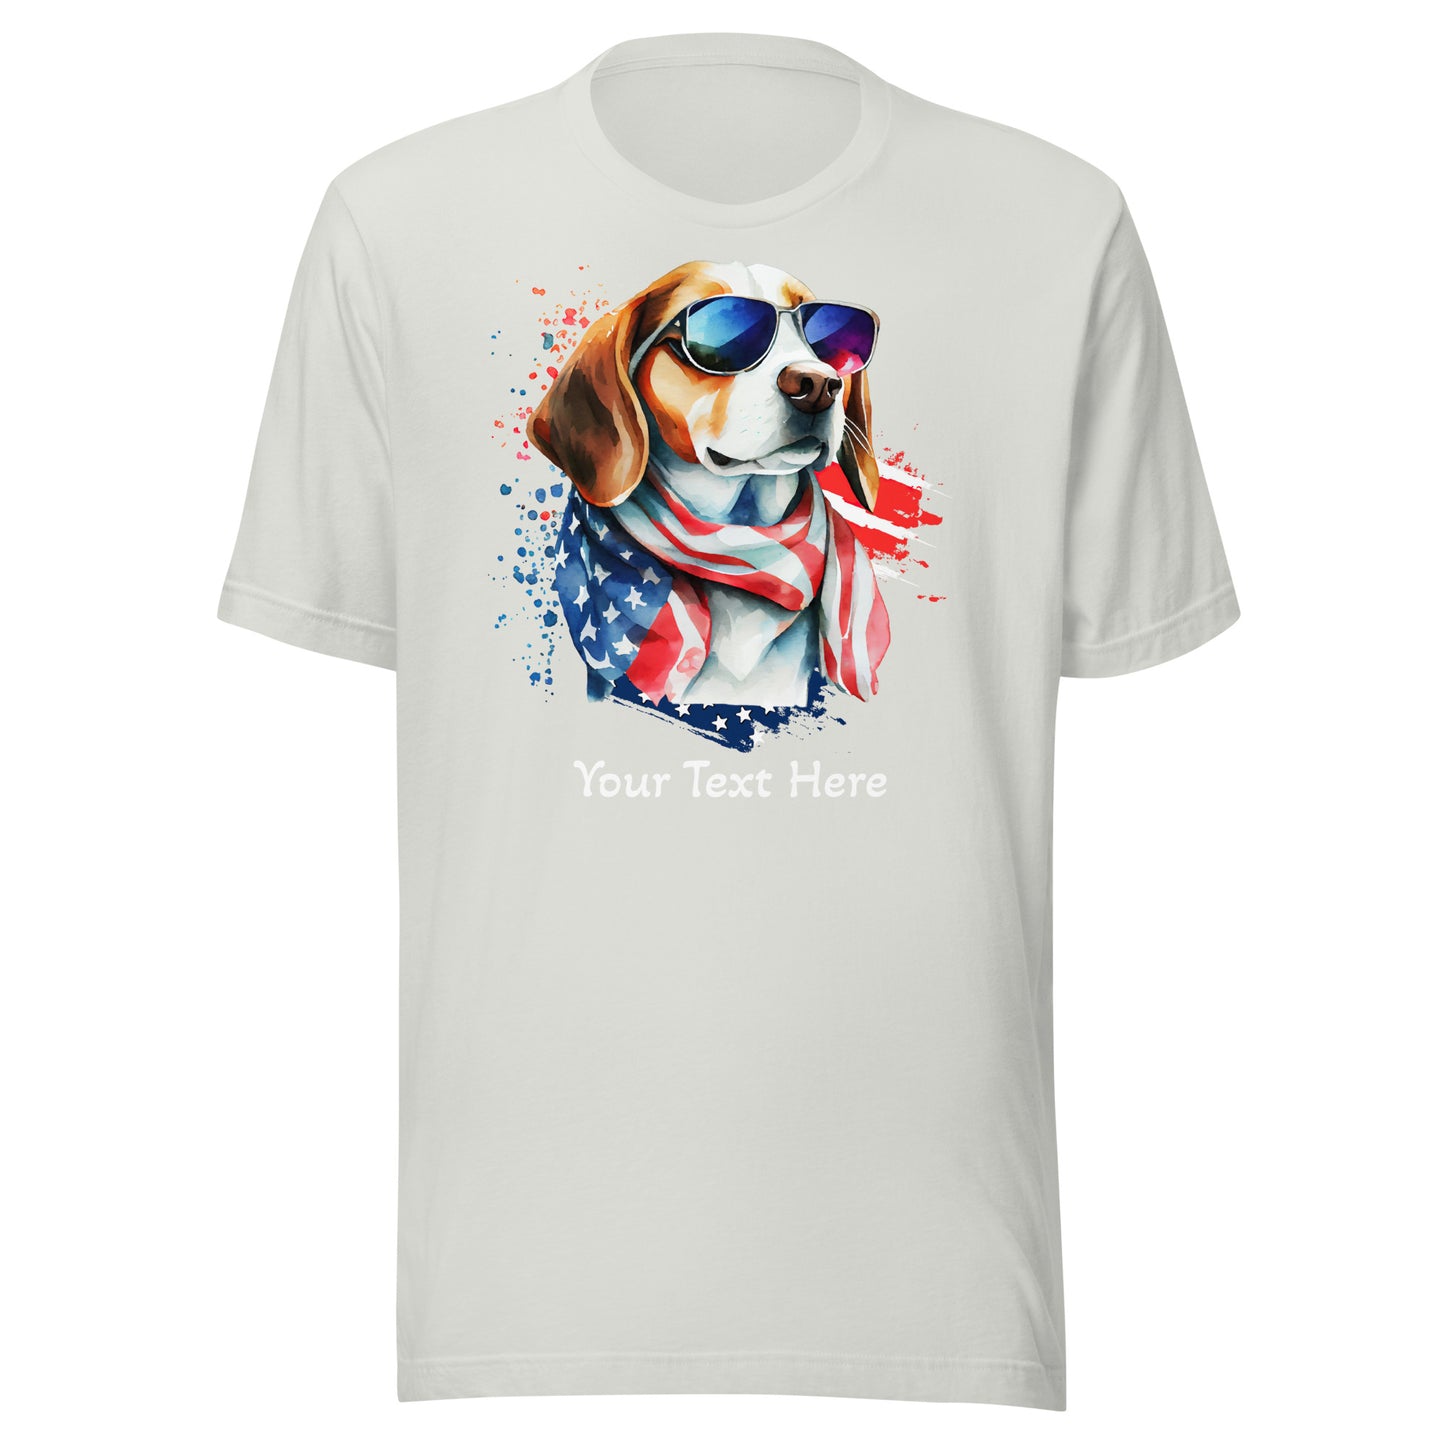 Silver Customizable Tshirt With Patriotic Dog